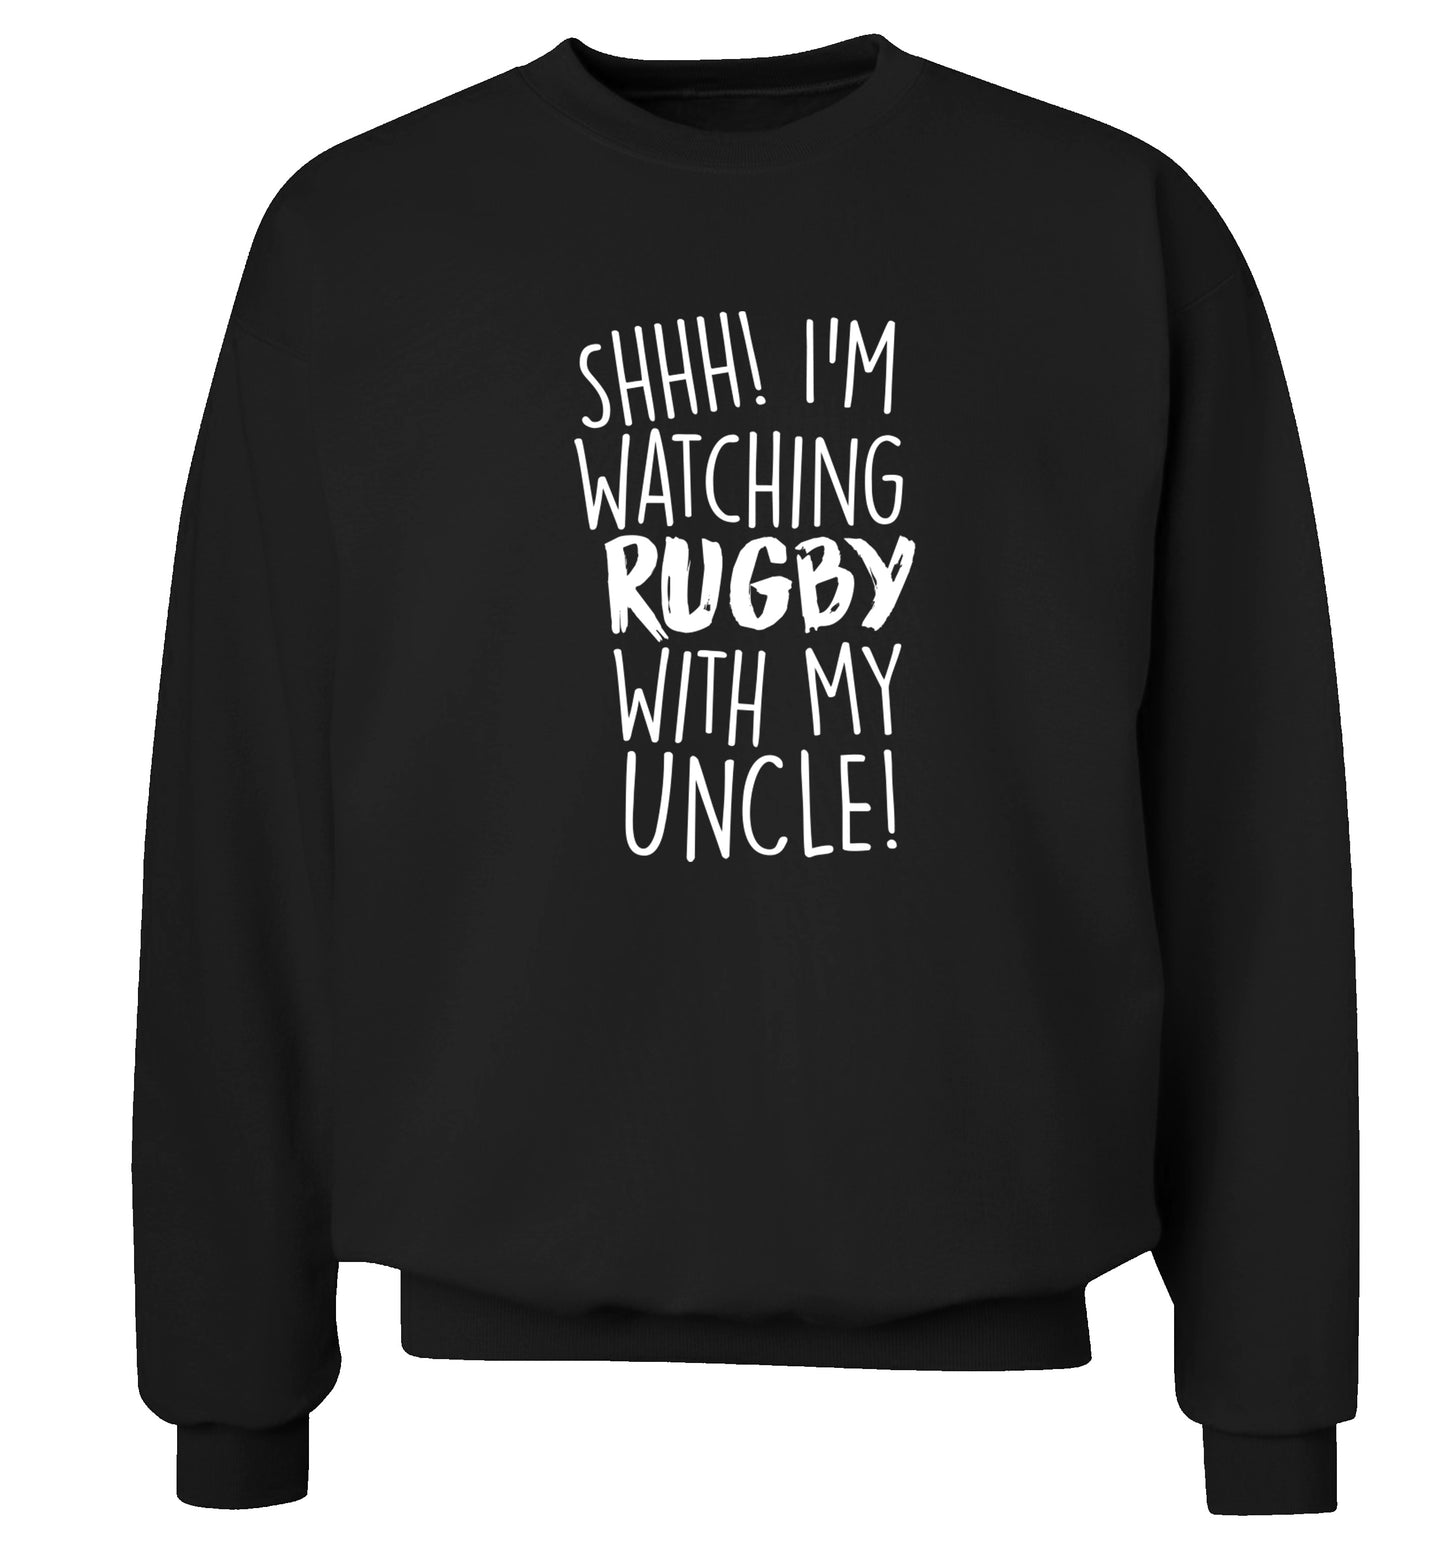 Shh.. I'm watching rugby with my uncle Adult's unisex black Sweater 2XL